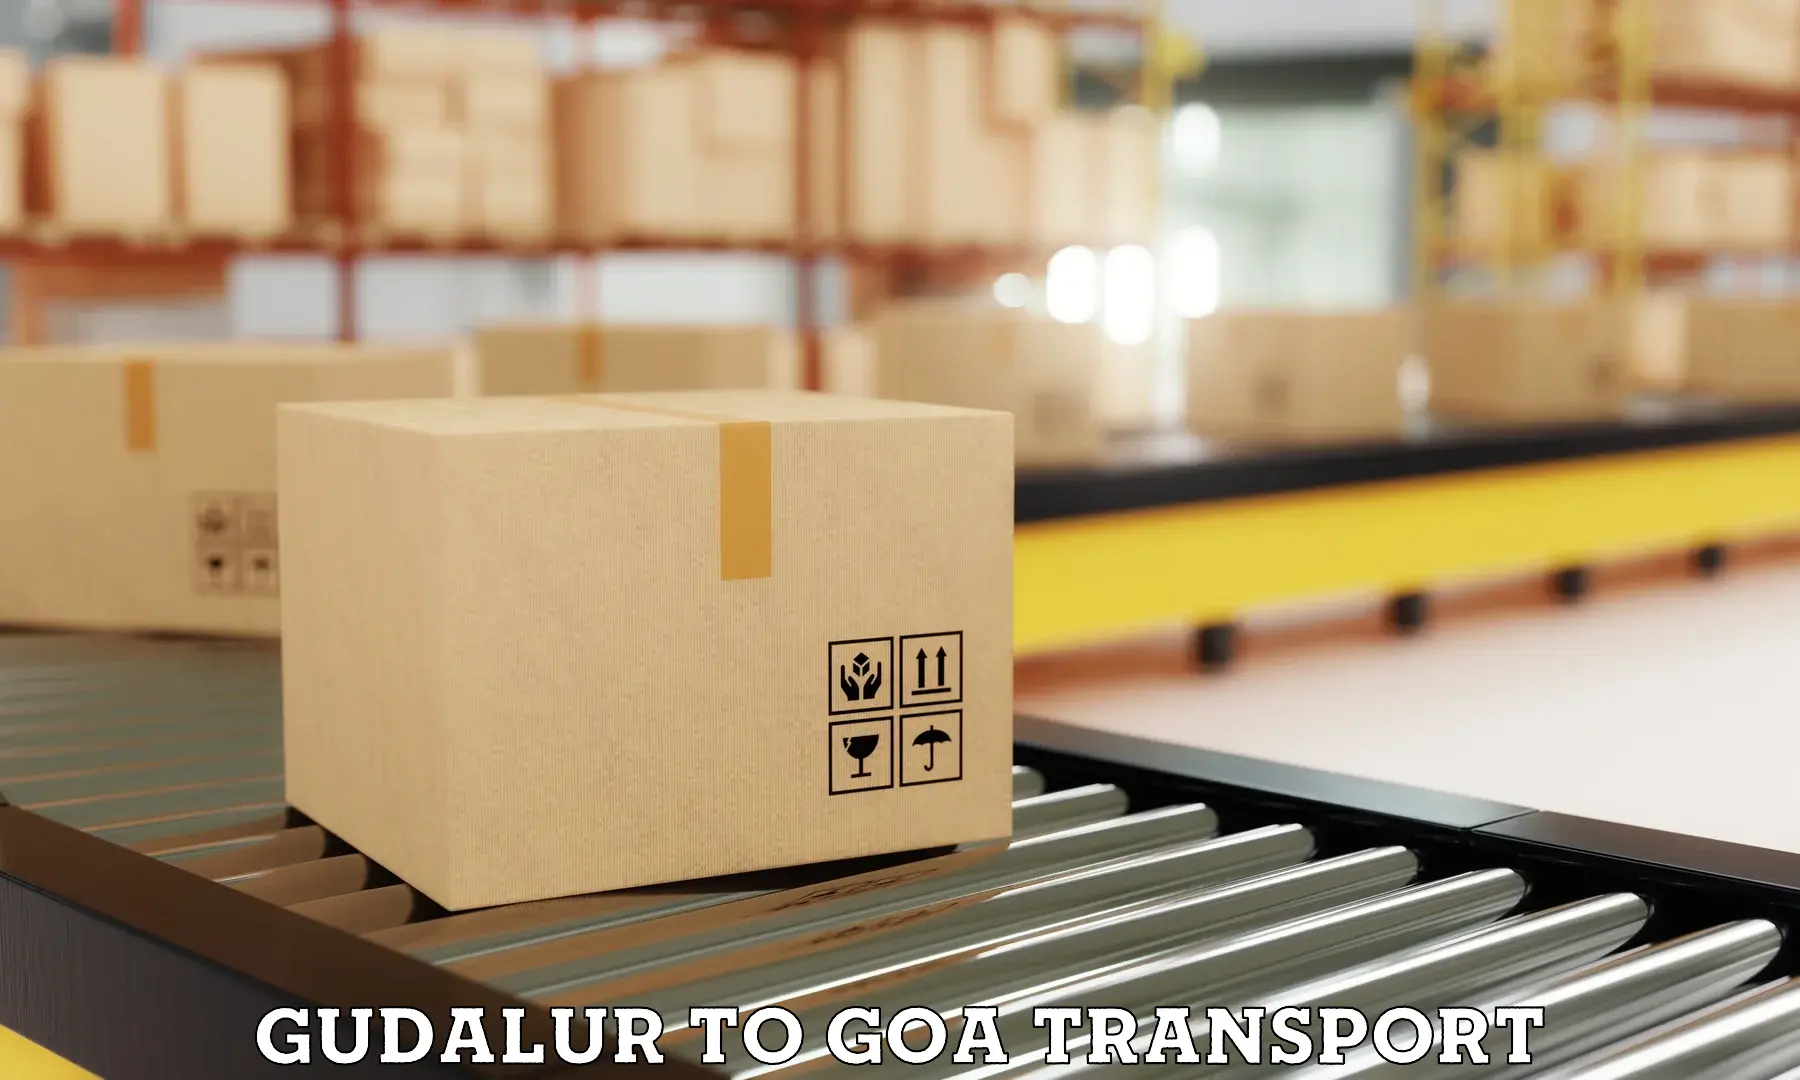 Nearby transport service Gudalur to Goa